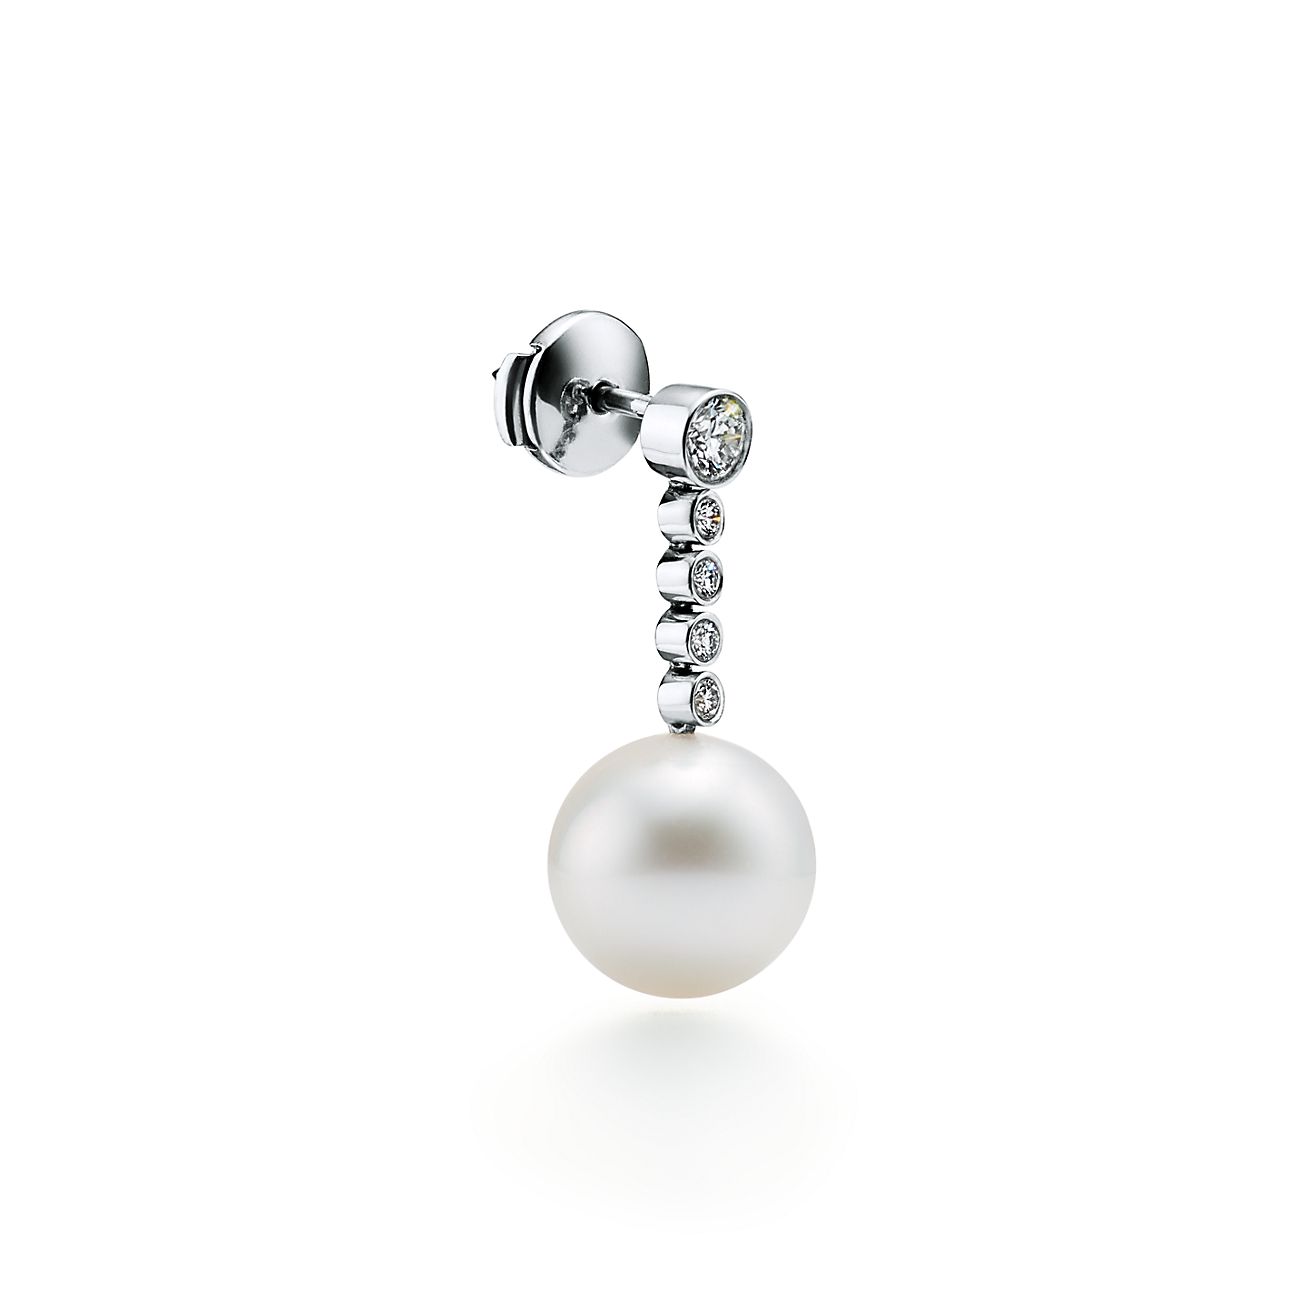 Tiffany Jazz™ earrings in platinum with South Sea cultured pearls